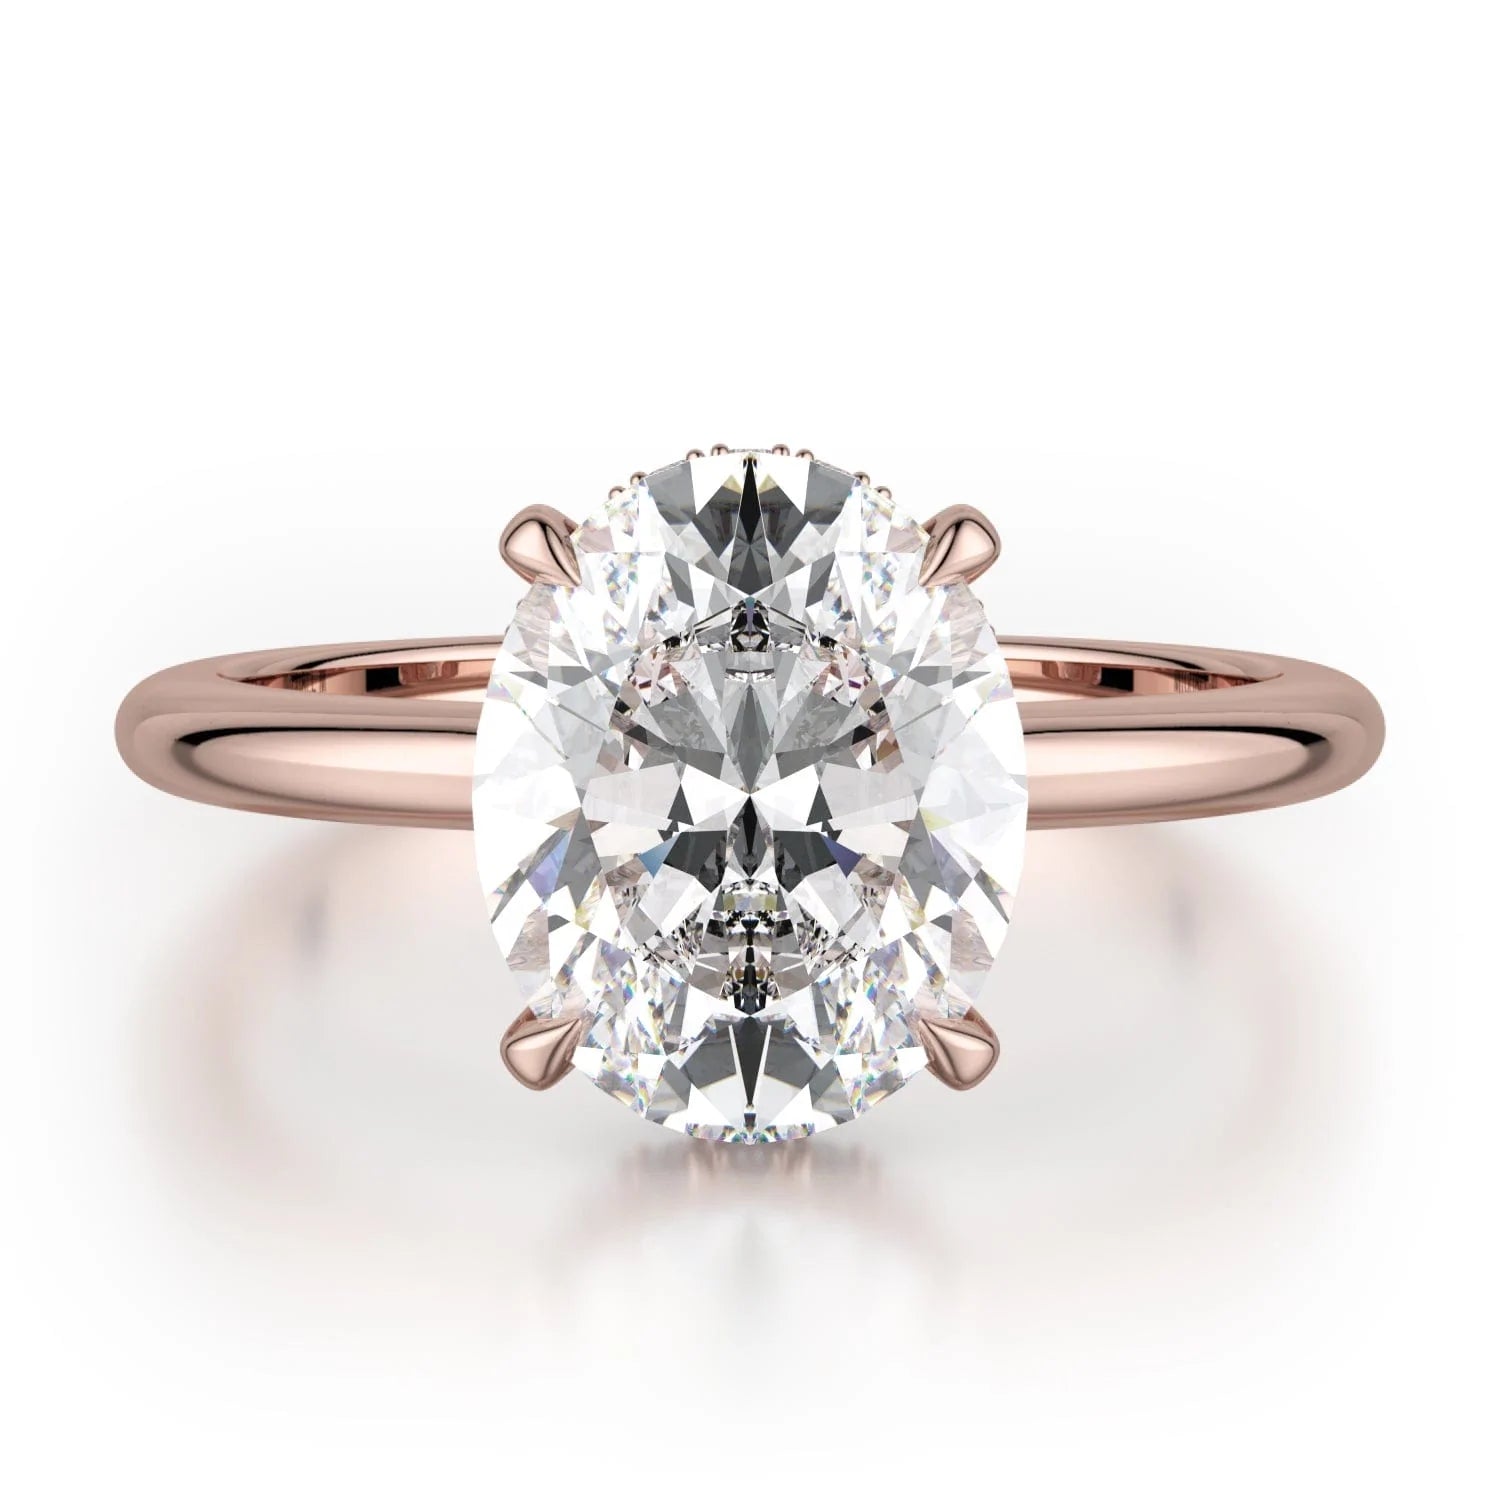 MICHAEL M Engagement Rings 18K Rose Gold CROWN R750-3 Oval-Cut Diamond Solitaire R750-3RG